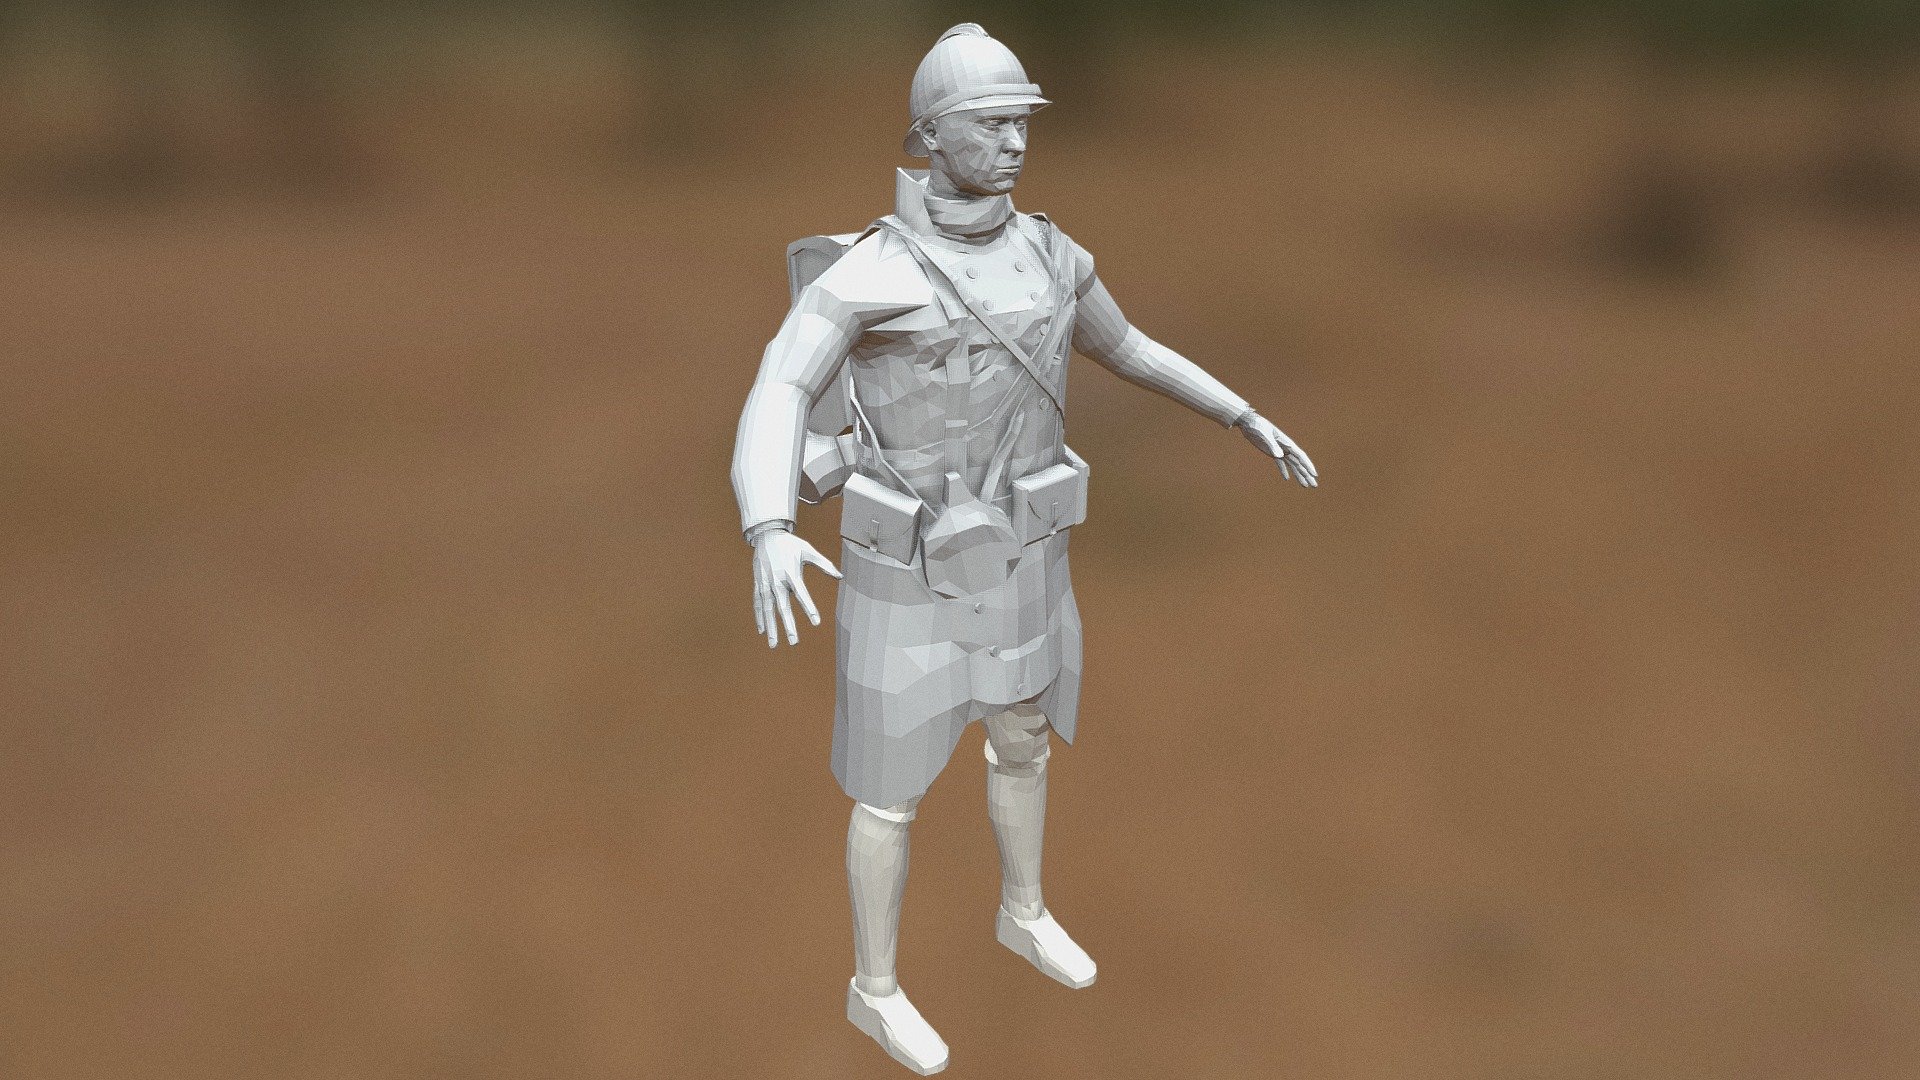 The cartoon french soldier of the times world war II.

Formats: fbx, obj, 3ds, blend

No textures, no material 3d model